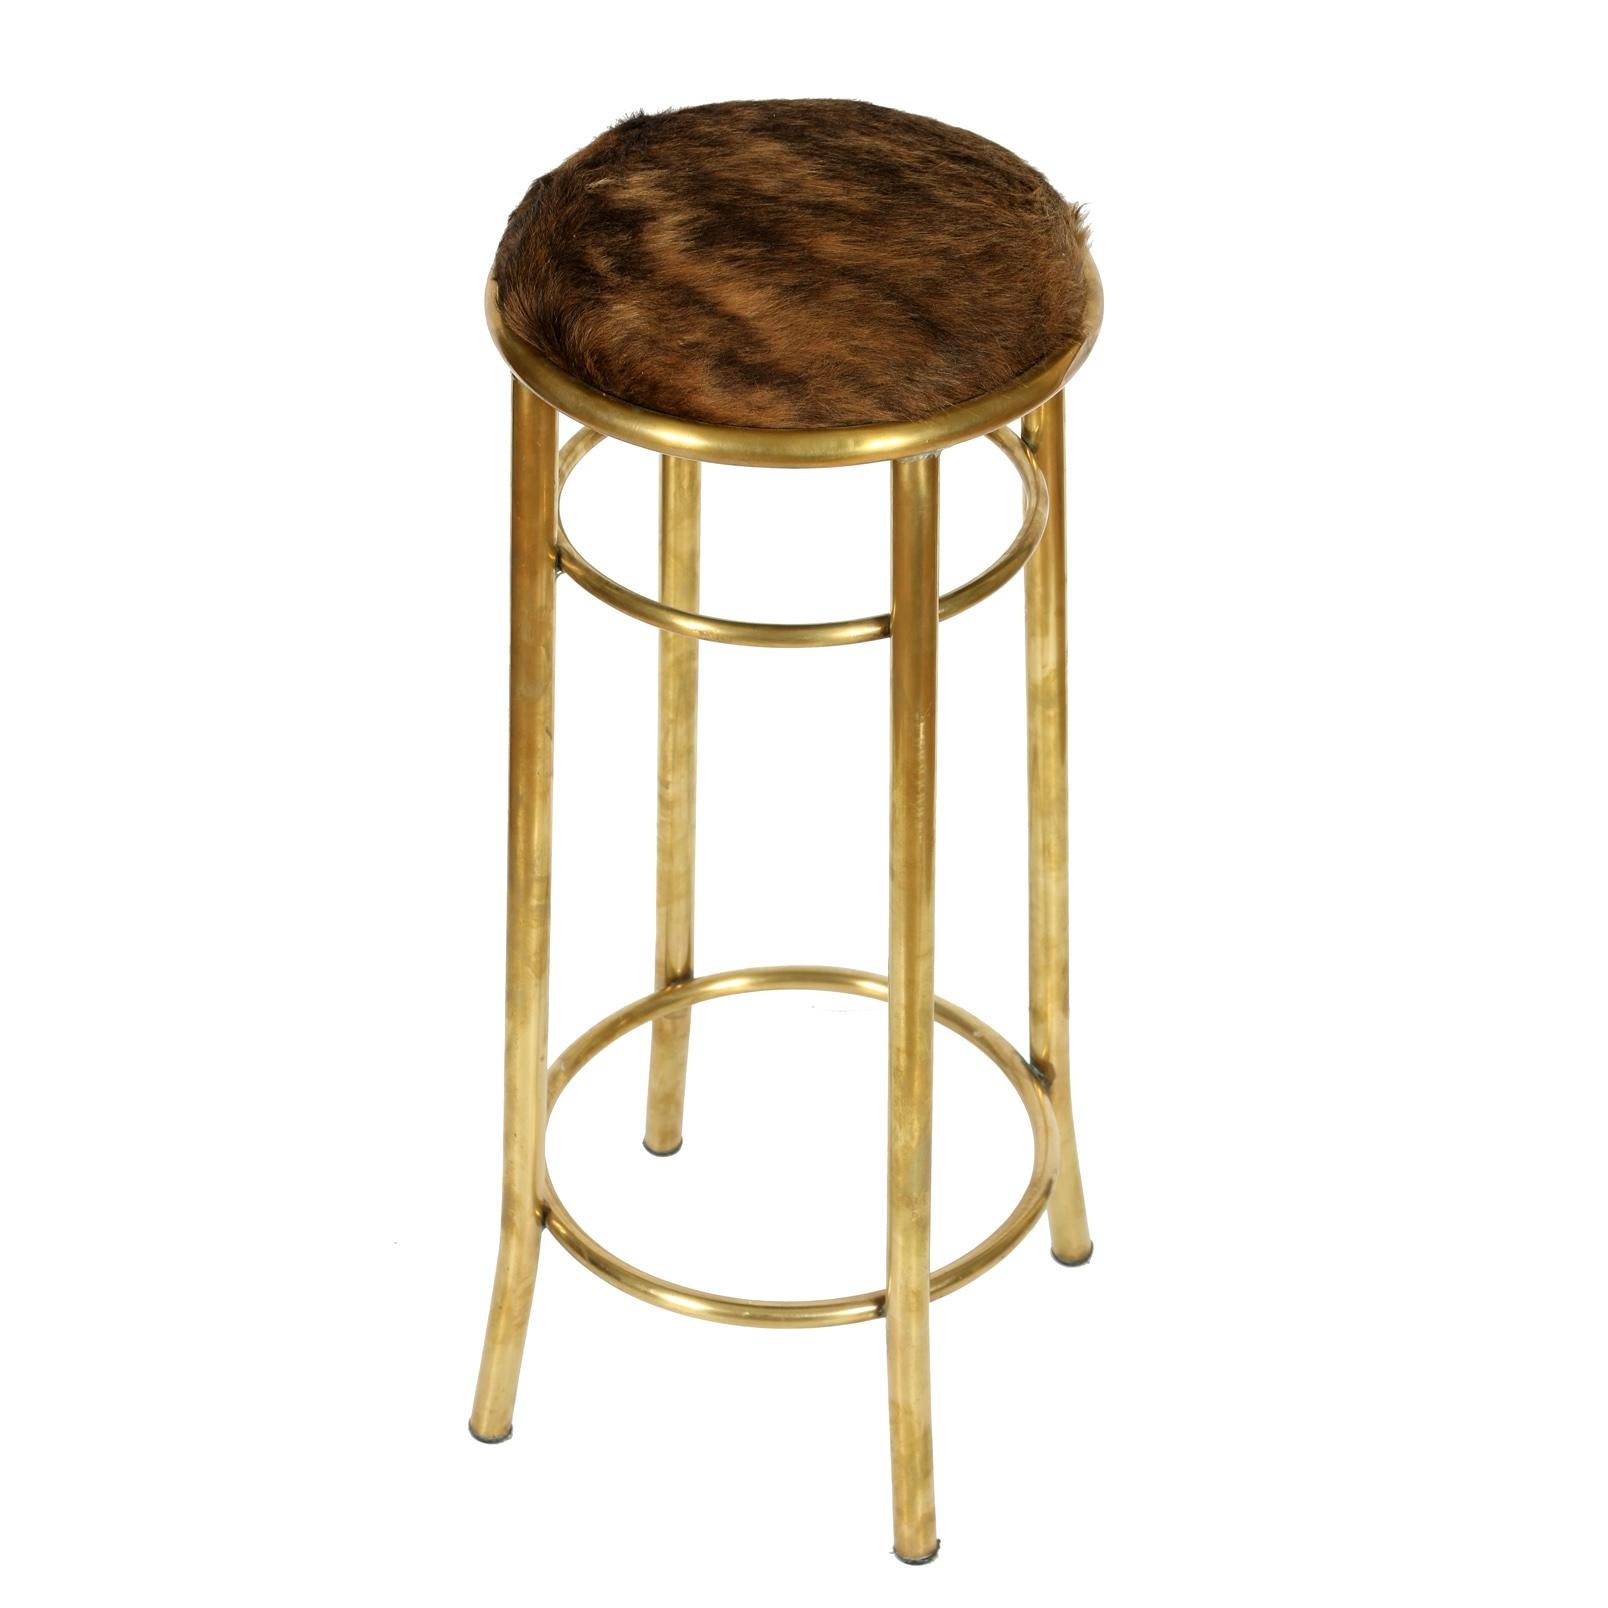 Mid-Century Modern set of three round barstools in brass with hide seats.